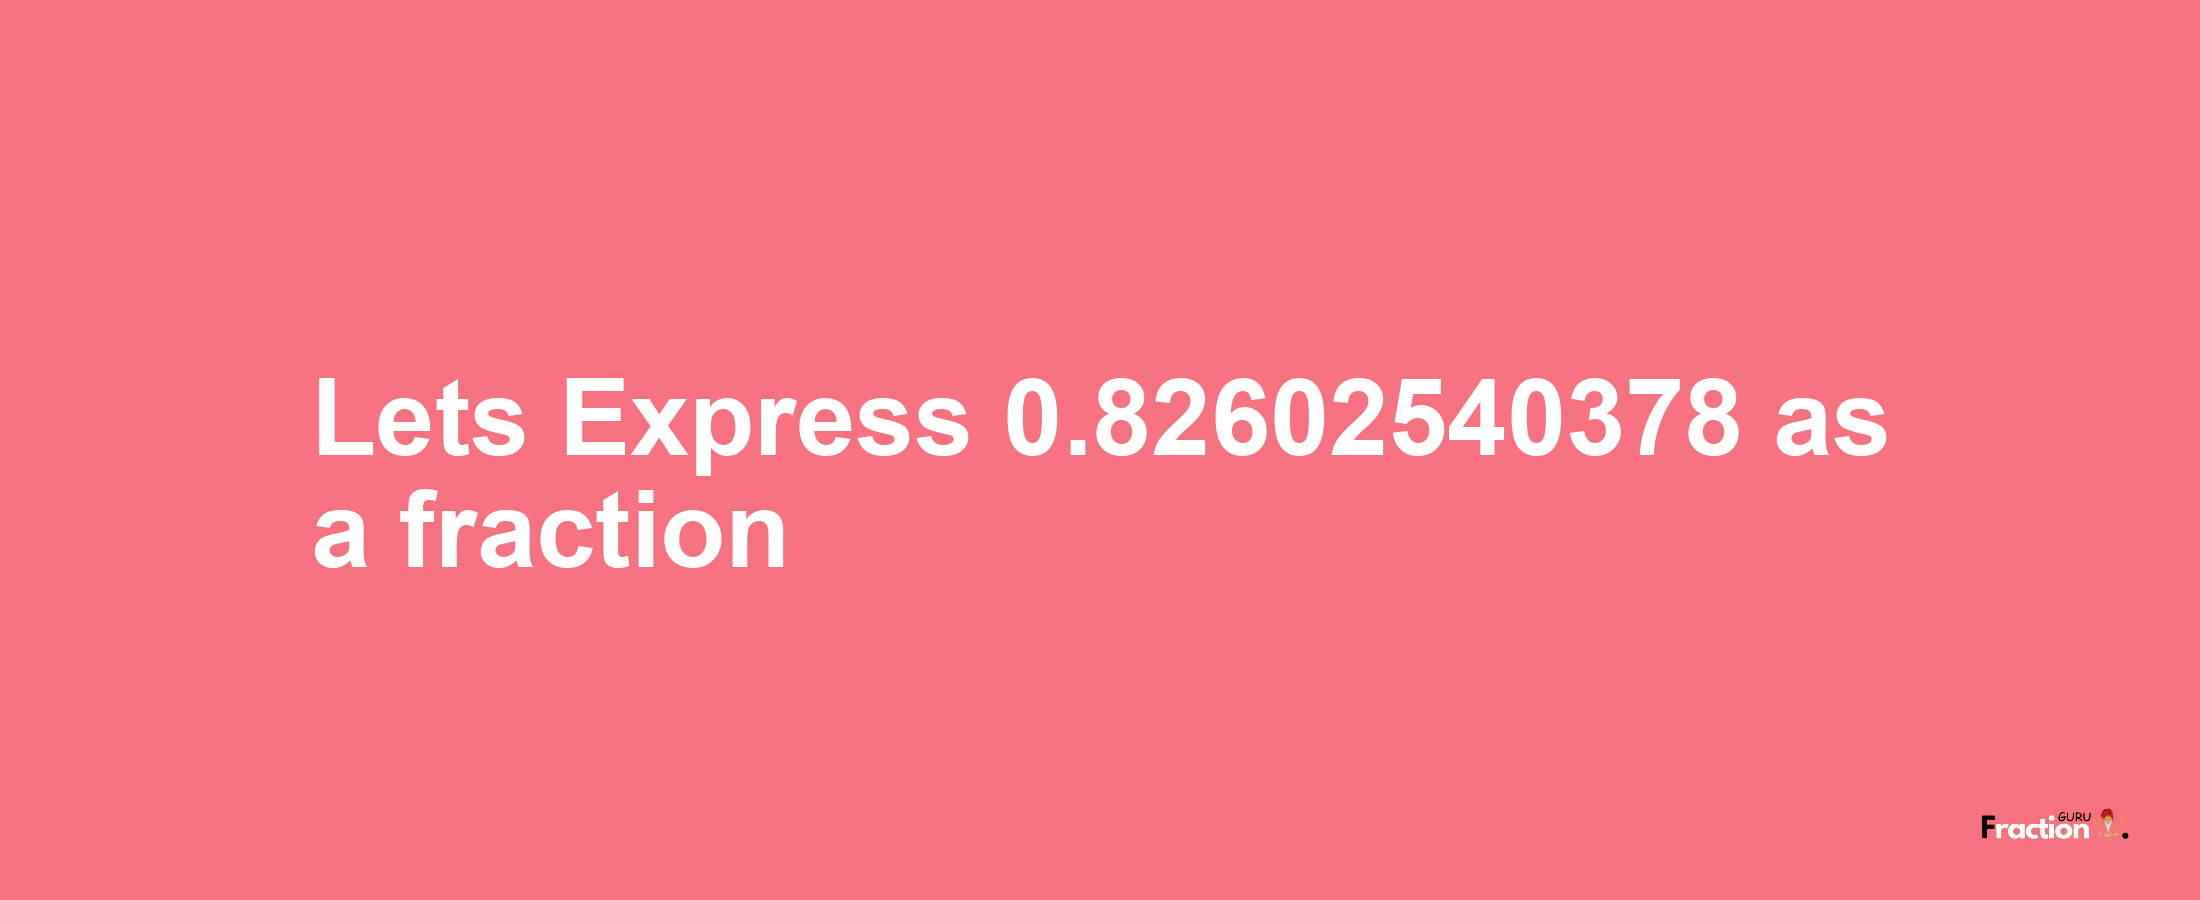 Lets Express 0.82602540378 as afraction